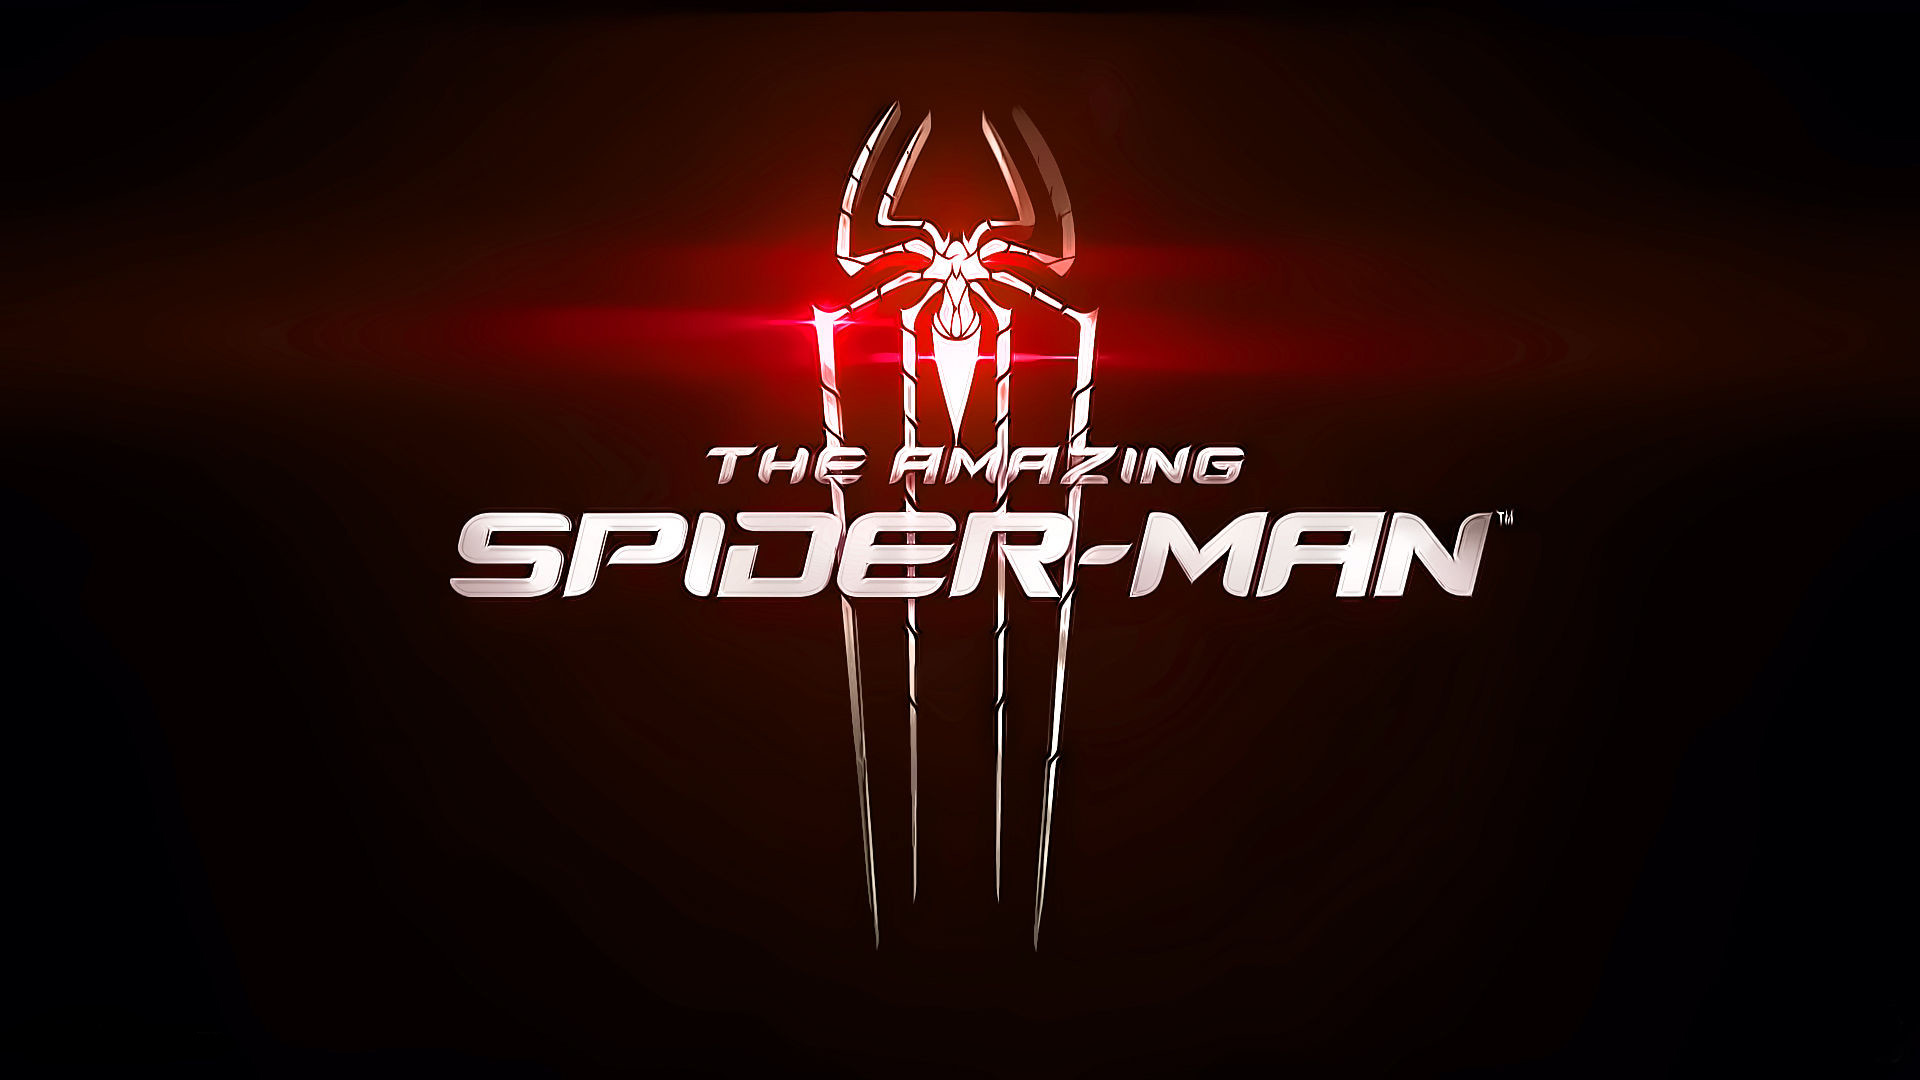 1920x1080 Spiderman Logo Wallpapers for Computer 299 - HD Wallpapers Site